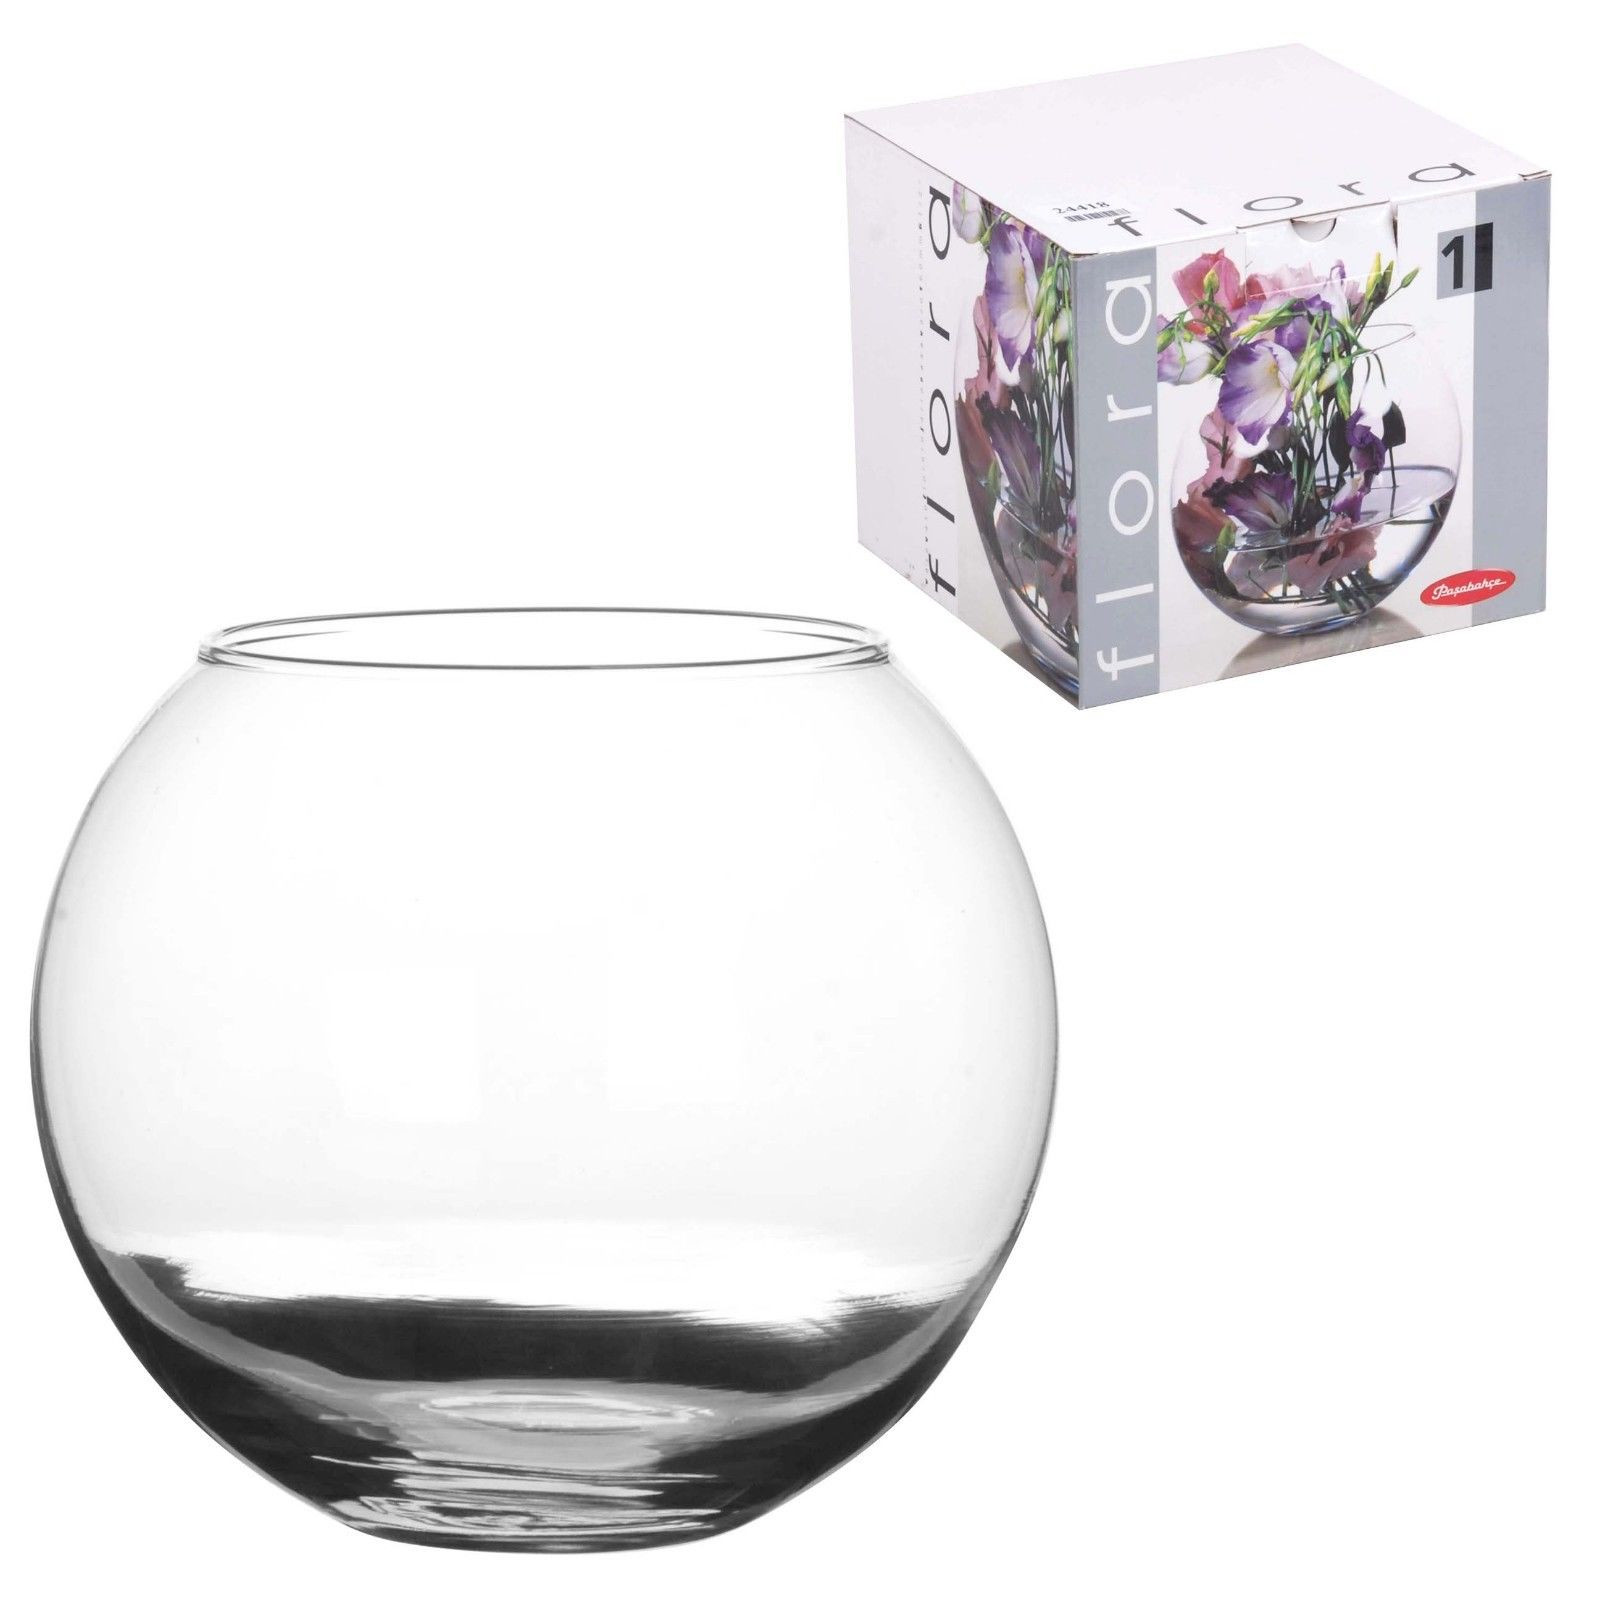 13 Great Clear Glass Vases for Sale 2024 free download clear glass vases for sale of pasabahce glass 16cm round botanica flower vase display fish bowl with 16 cm fishbowl bubble ball bowl